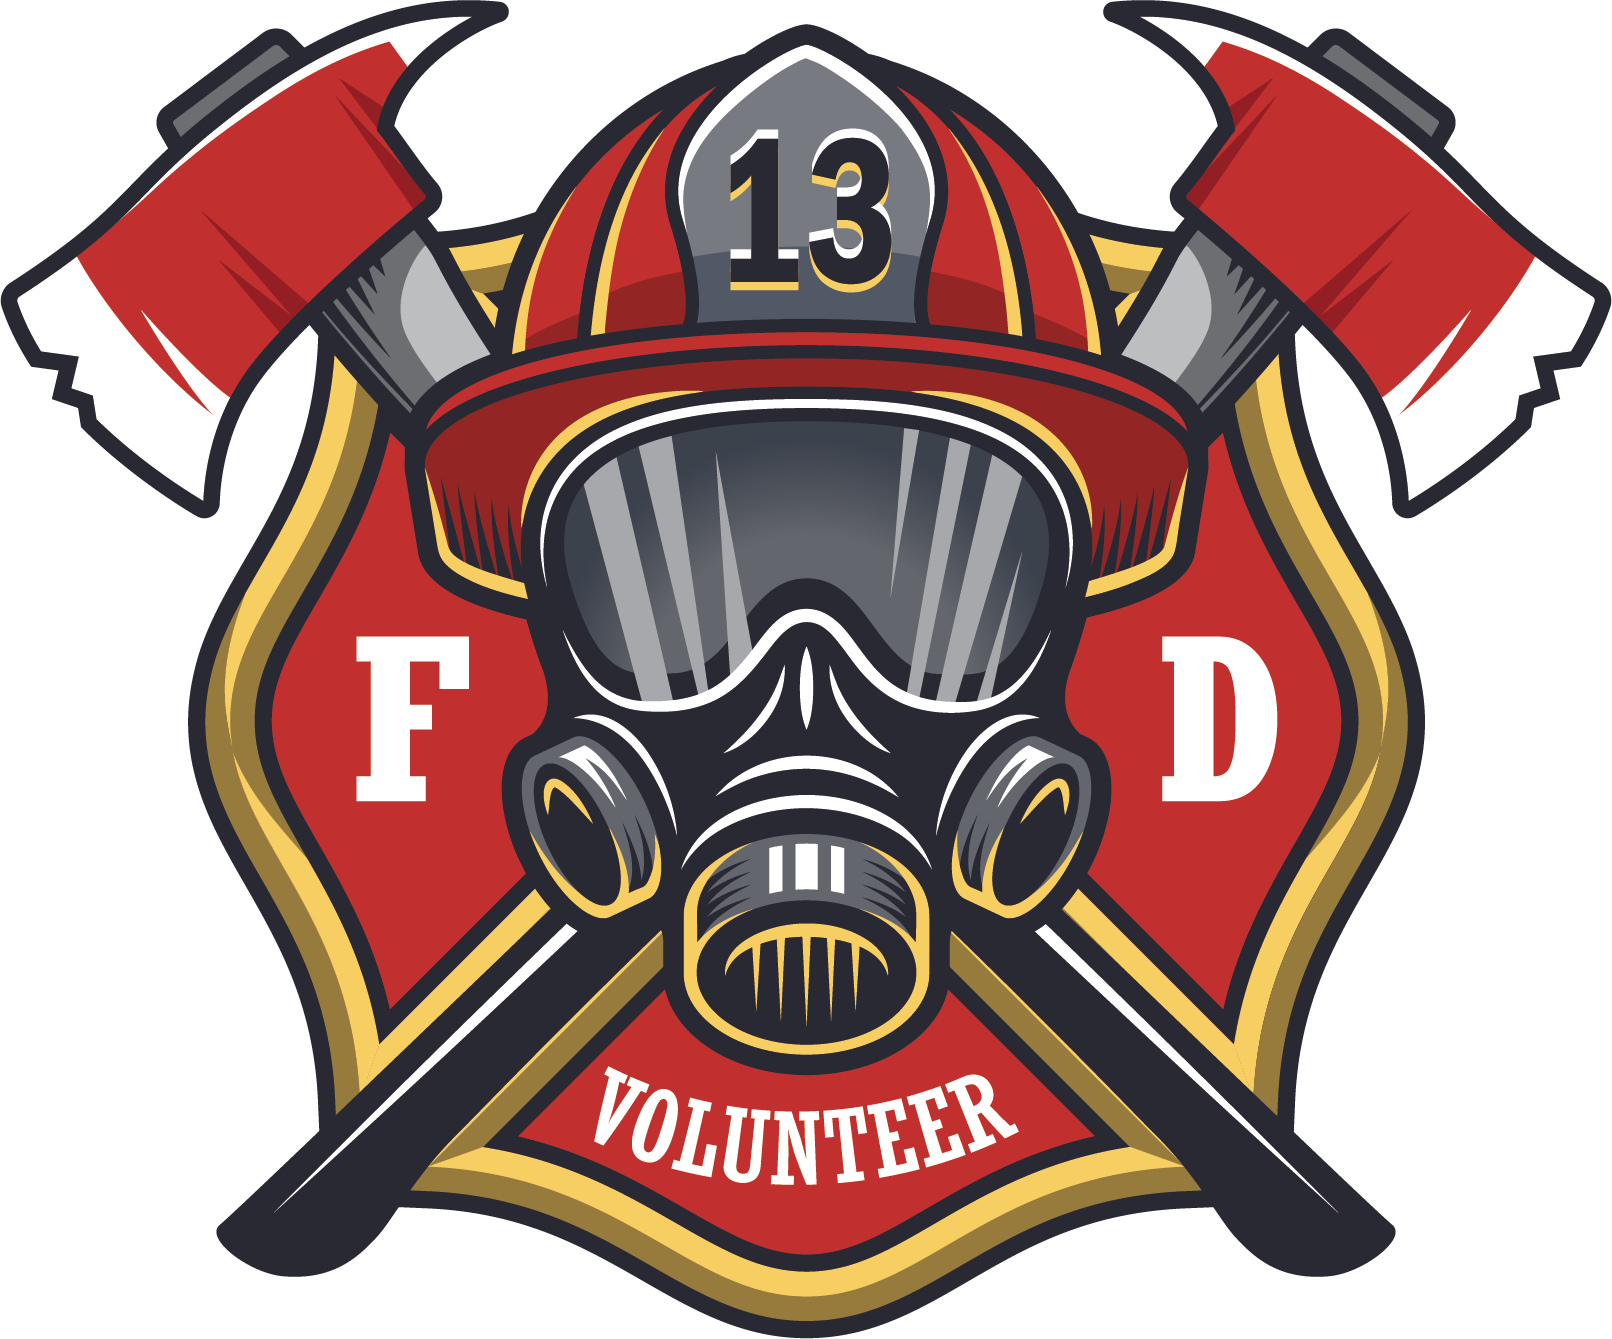 Fire Department Logo Vector Fire And Rescue Department Malaysia Hd ...